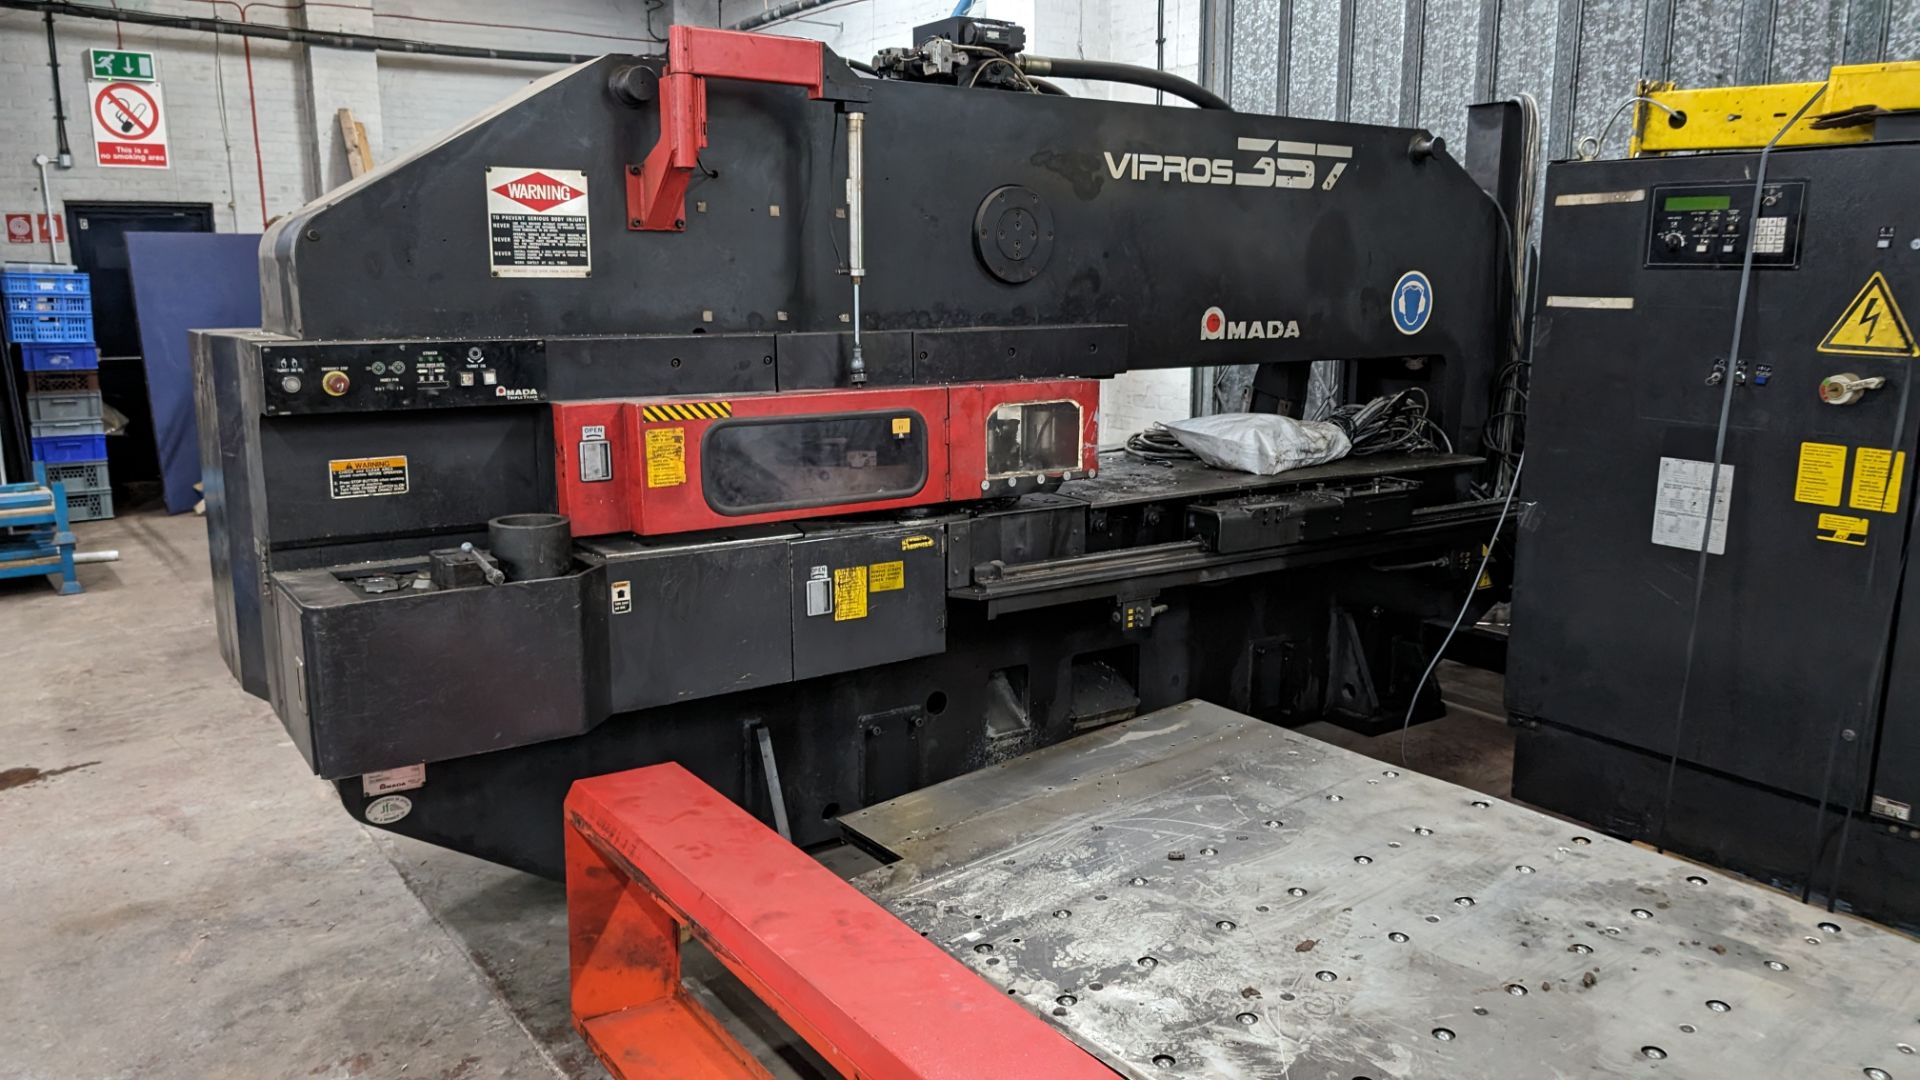 1995 Amada Vipros 357 NC turret punch press, 45 turret stations, 30 ton capacity, serial number 3571 - Image 3 of 51